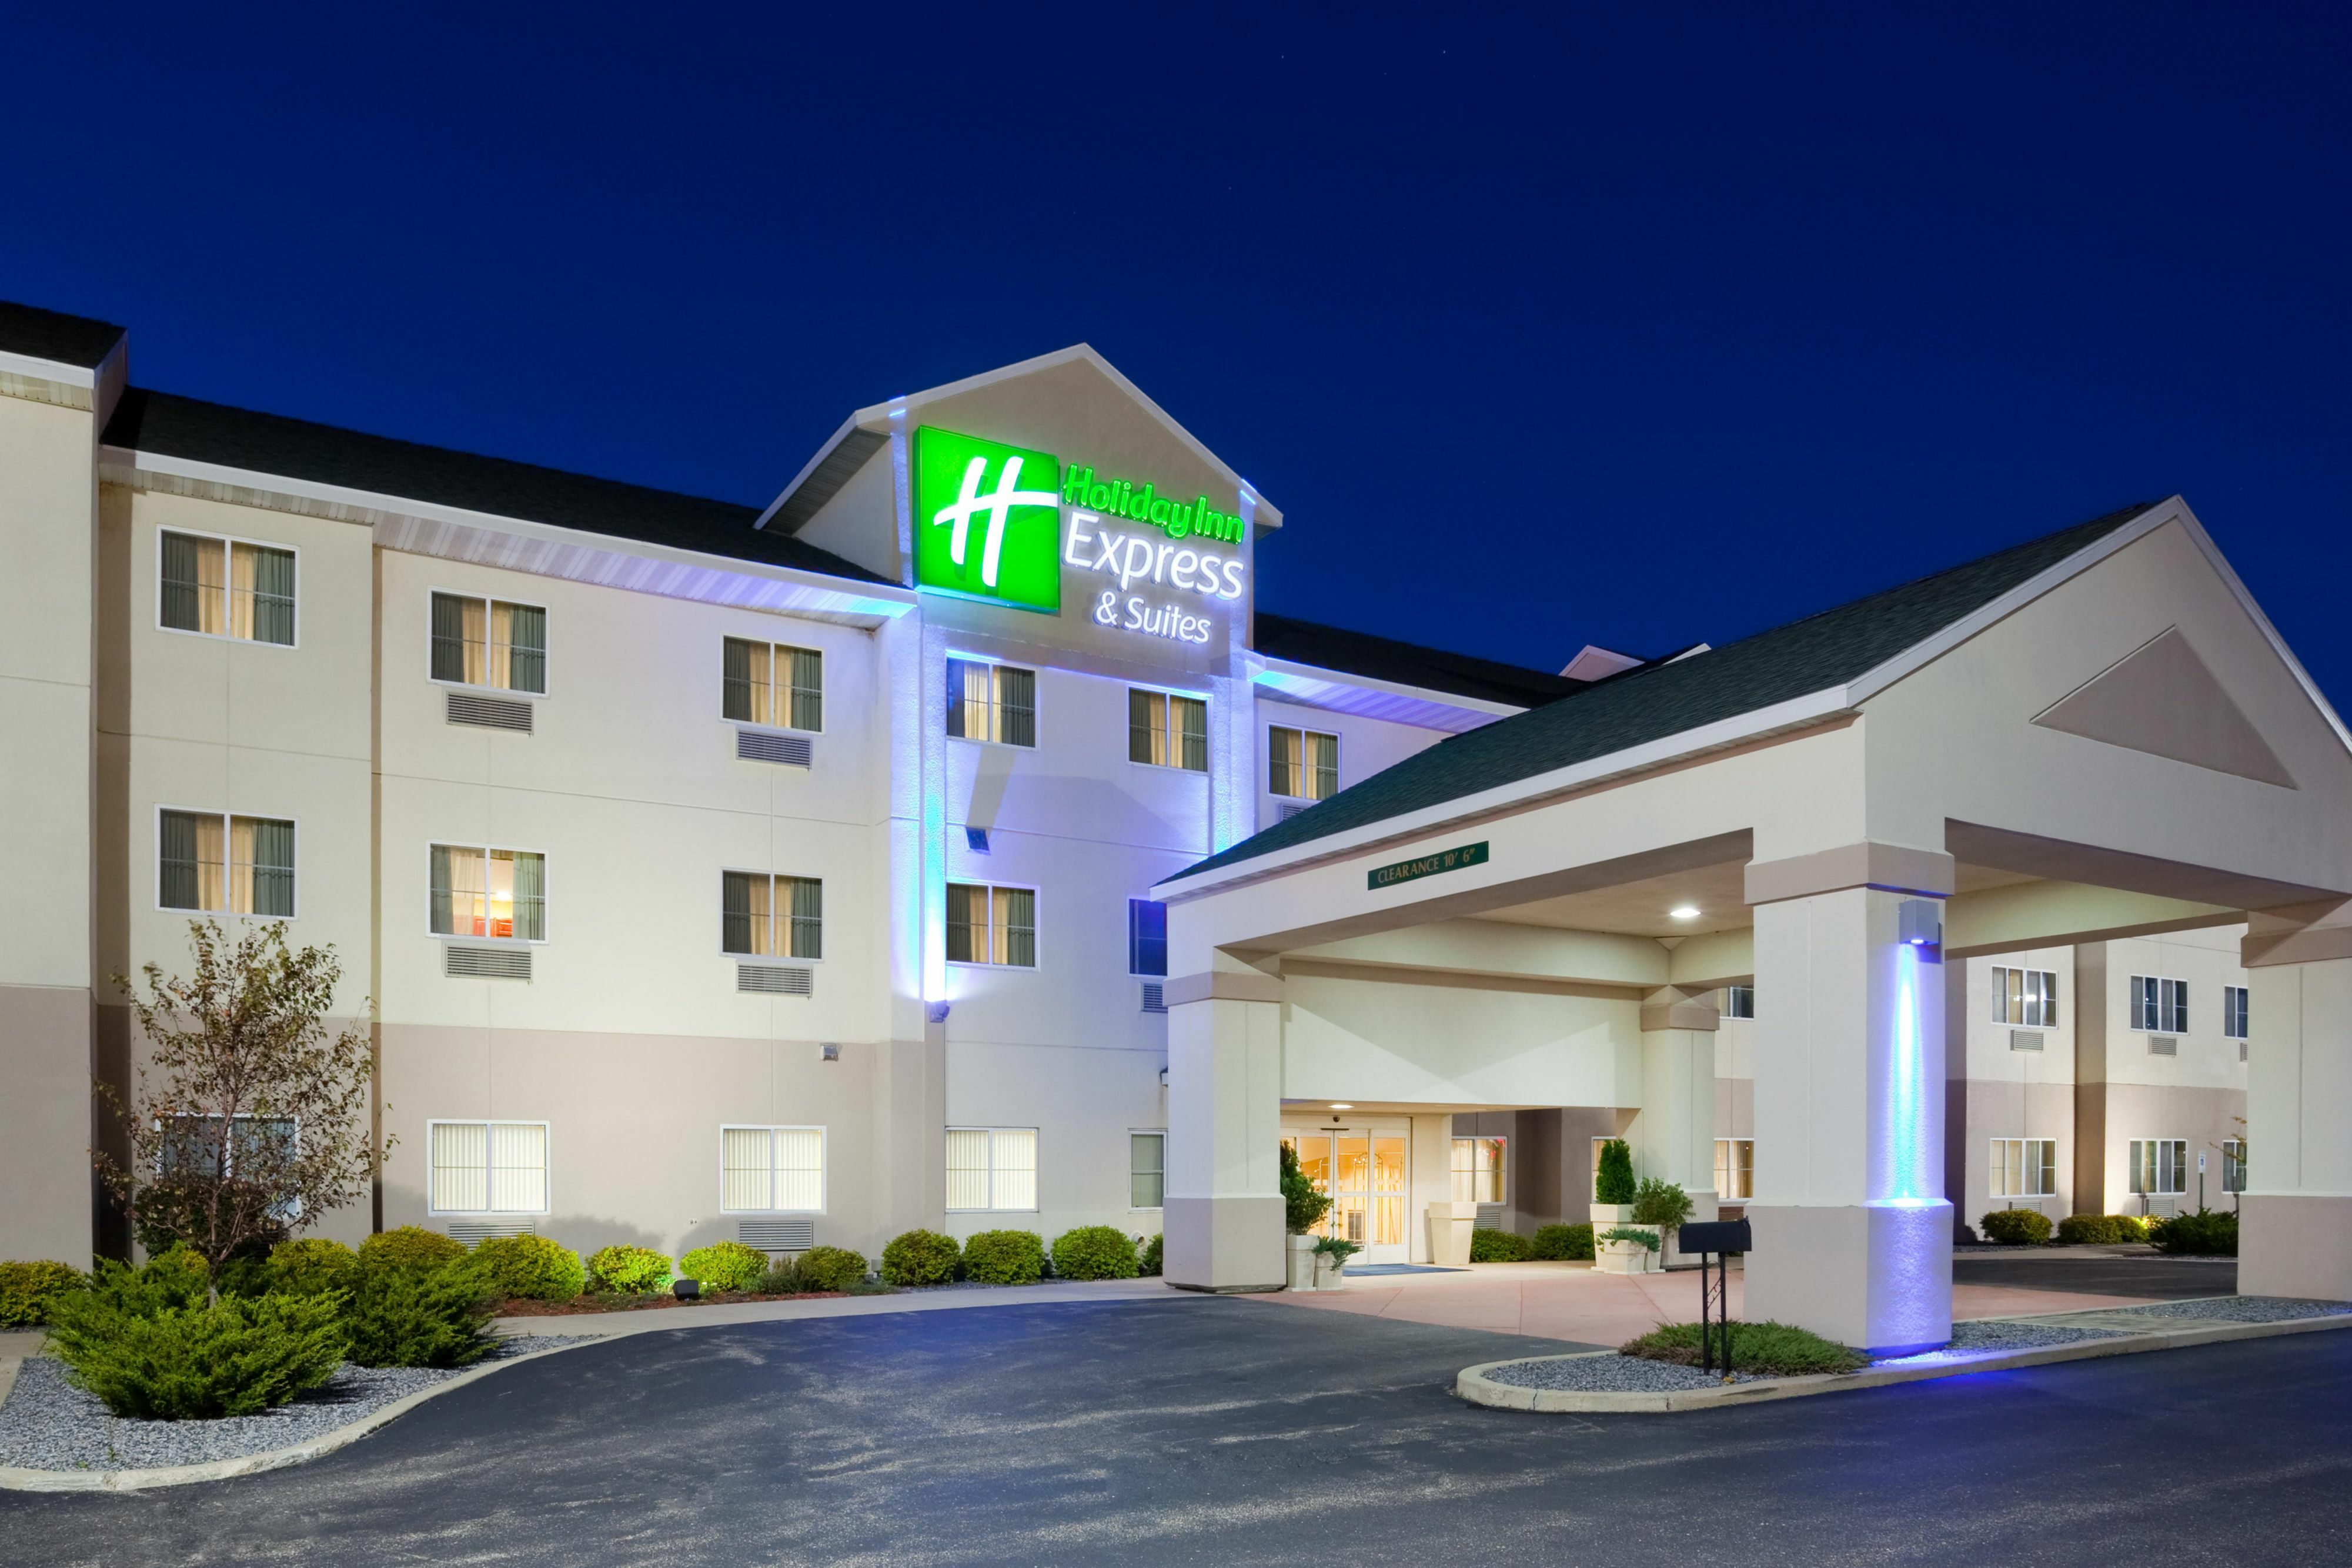 Photo of Holiday Inn Express & Suites Stevens Point, Stevens Point, WI